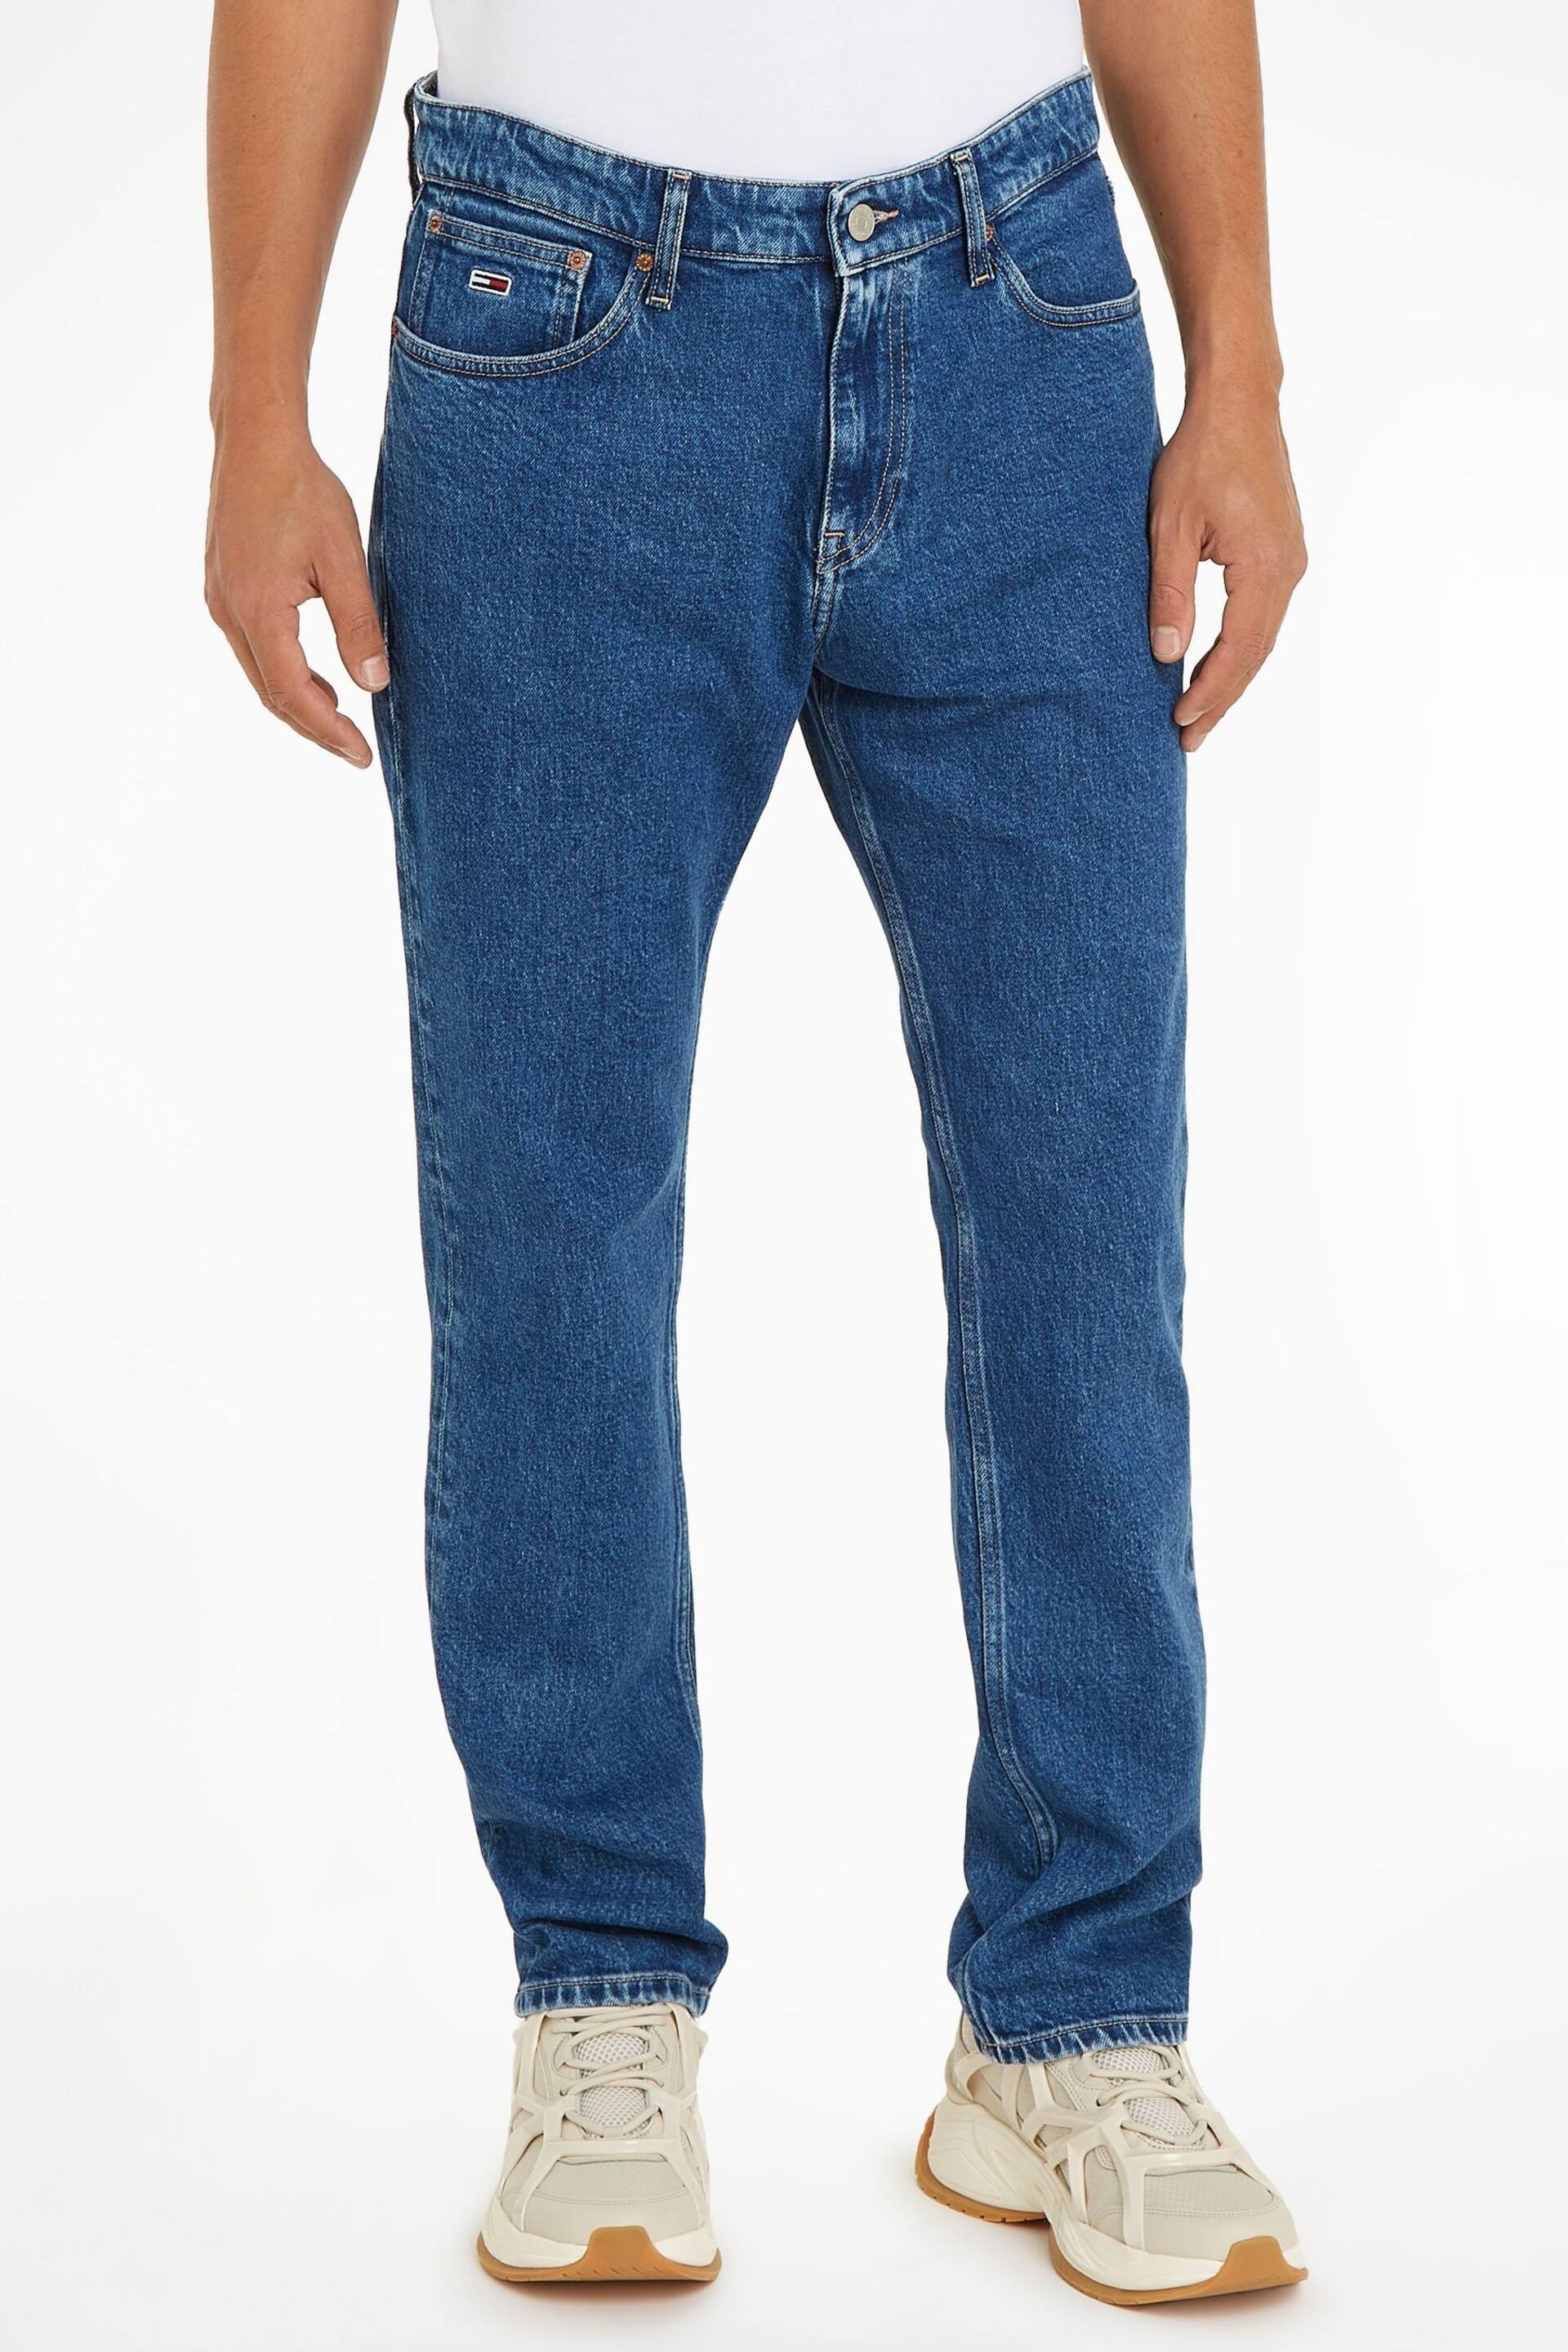 Tommy Jeans Ryan Regular Straight Fit Jeans - Image 1 of 6